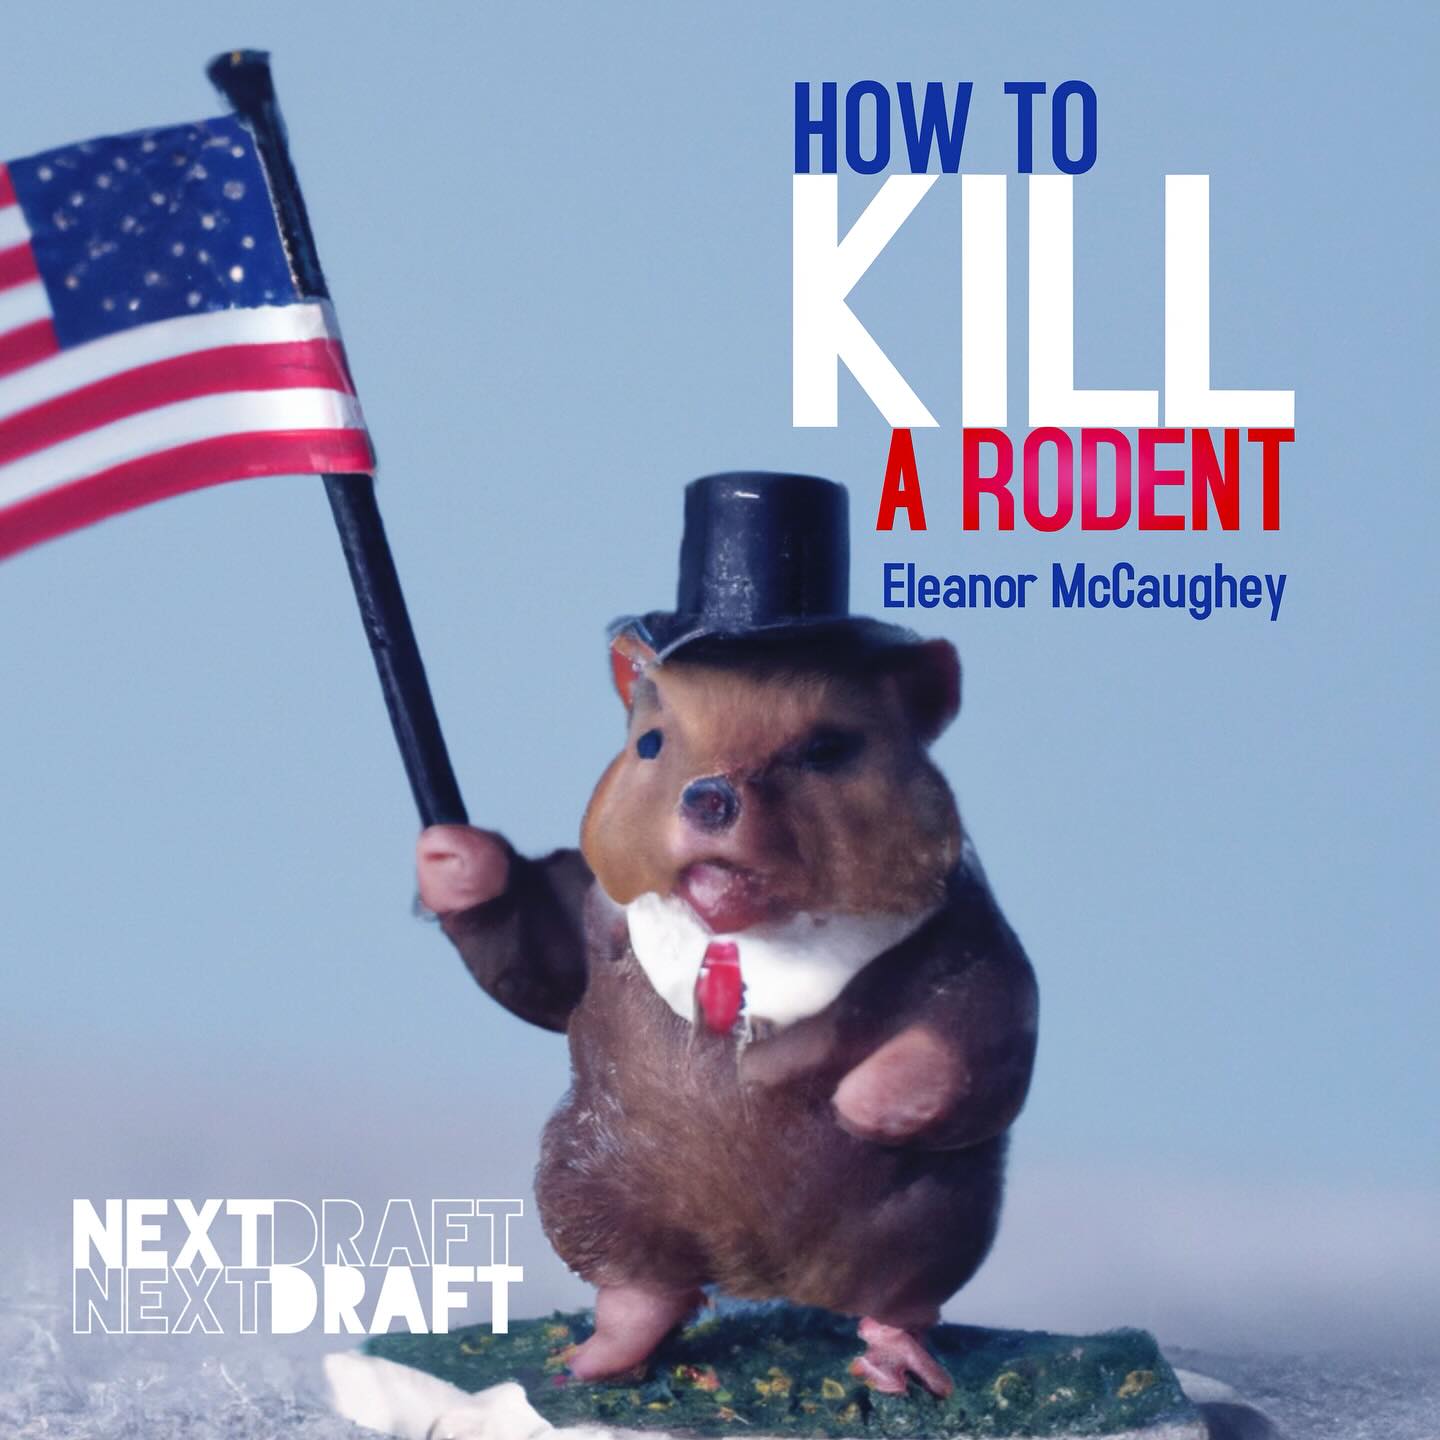 Next Draft Series: How to Kill a Rodent